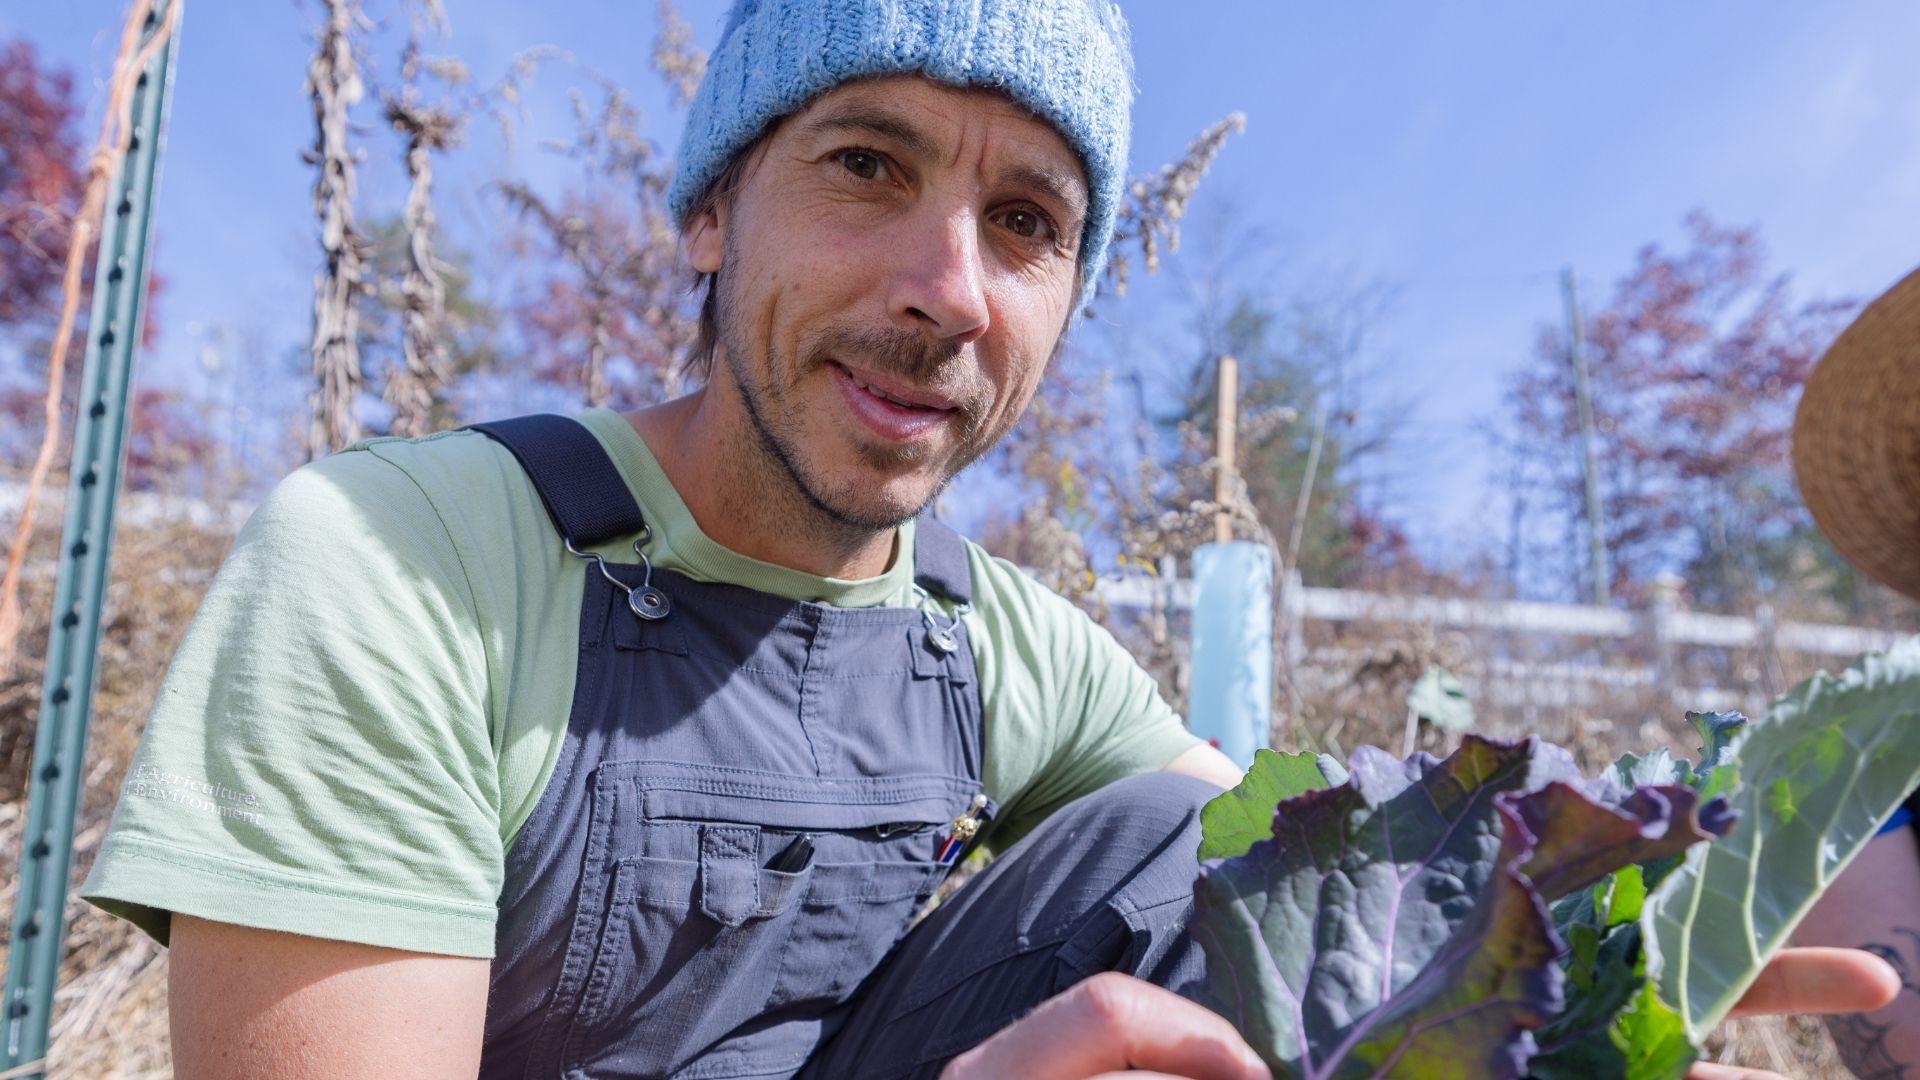 Chris Smith smiles while holding some collard greens, as featured in State of Change: Seeds of Hope.